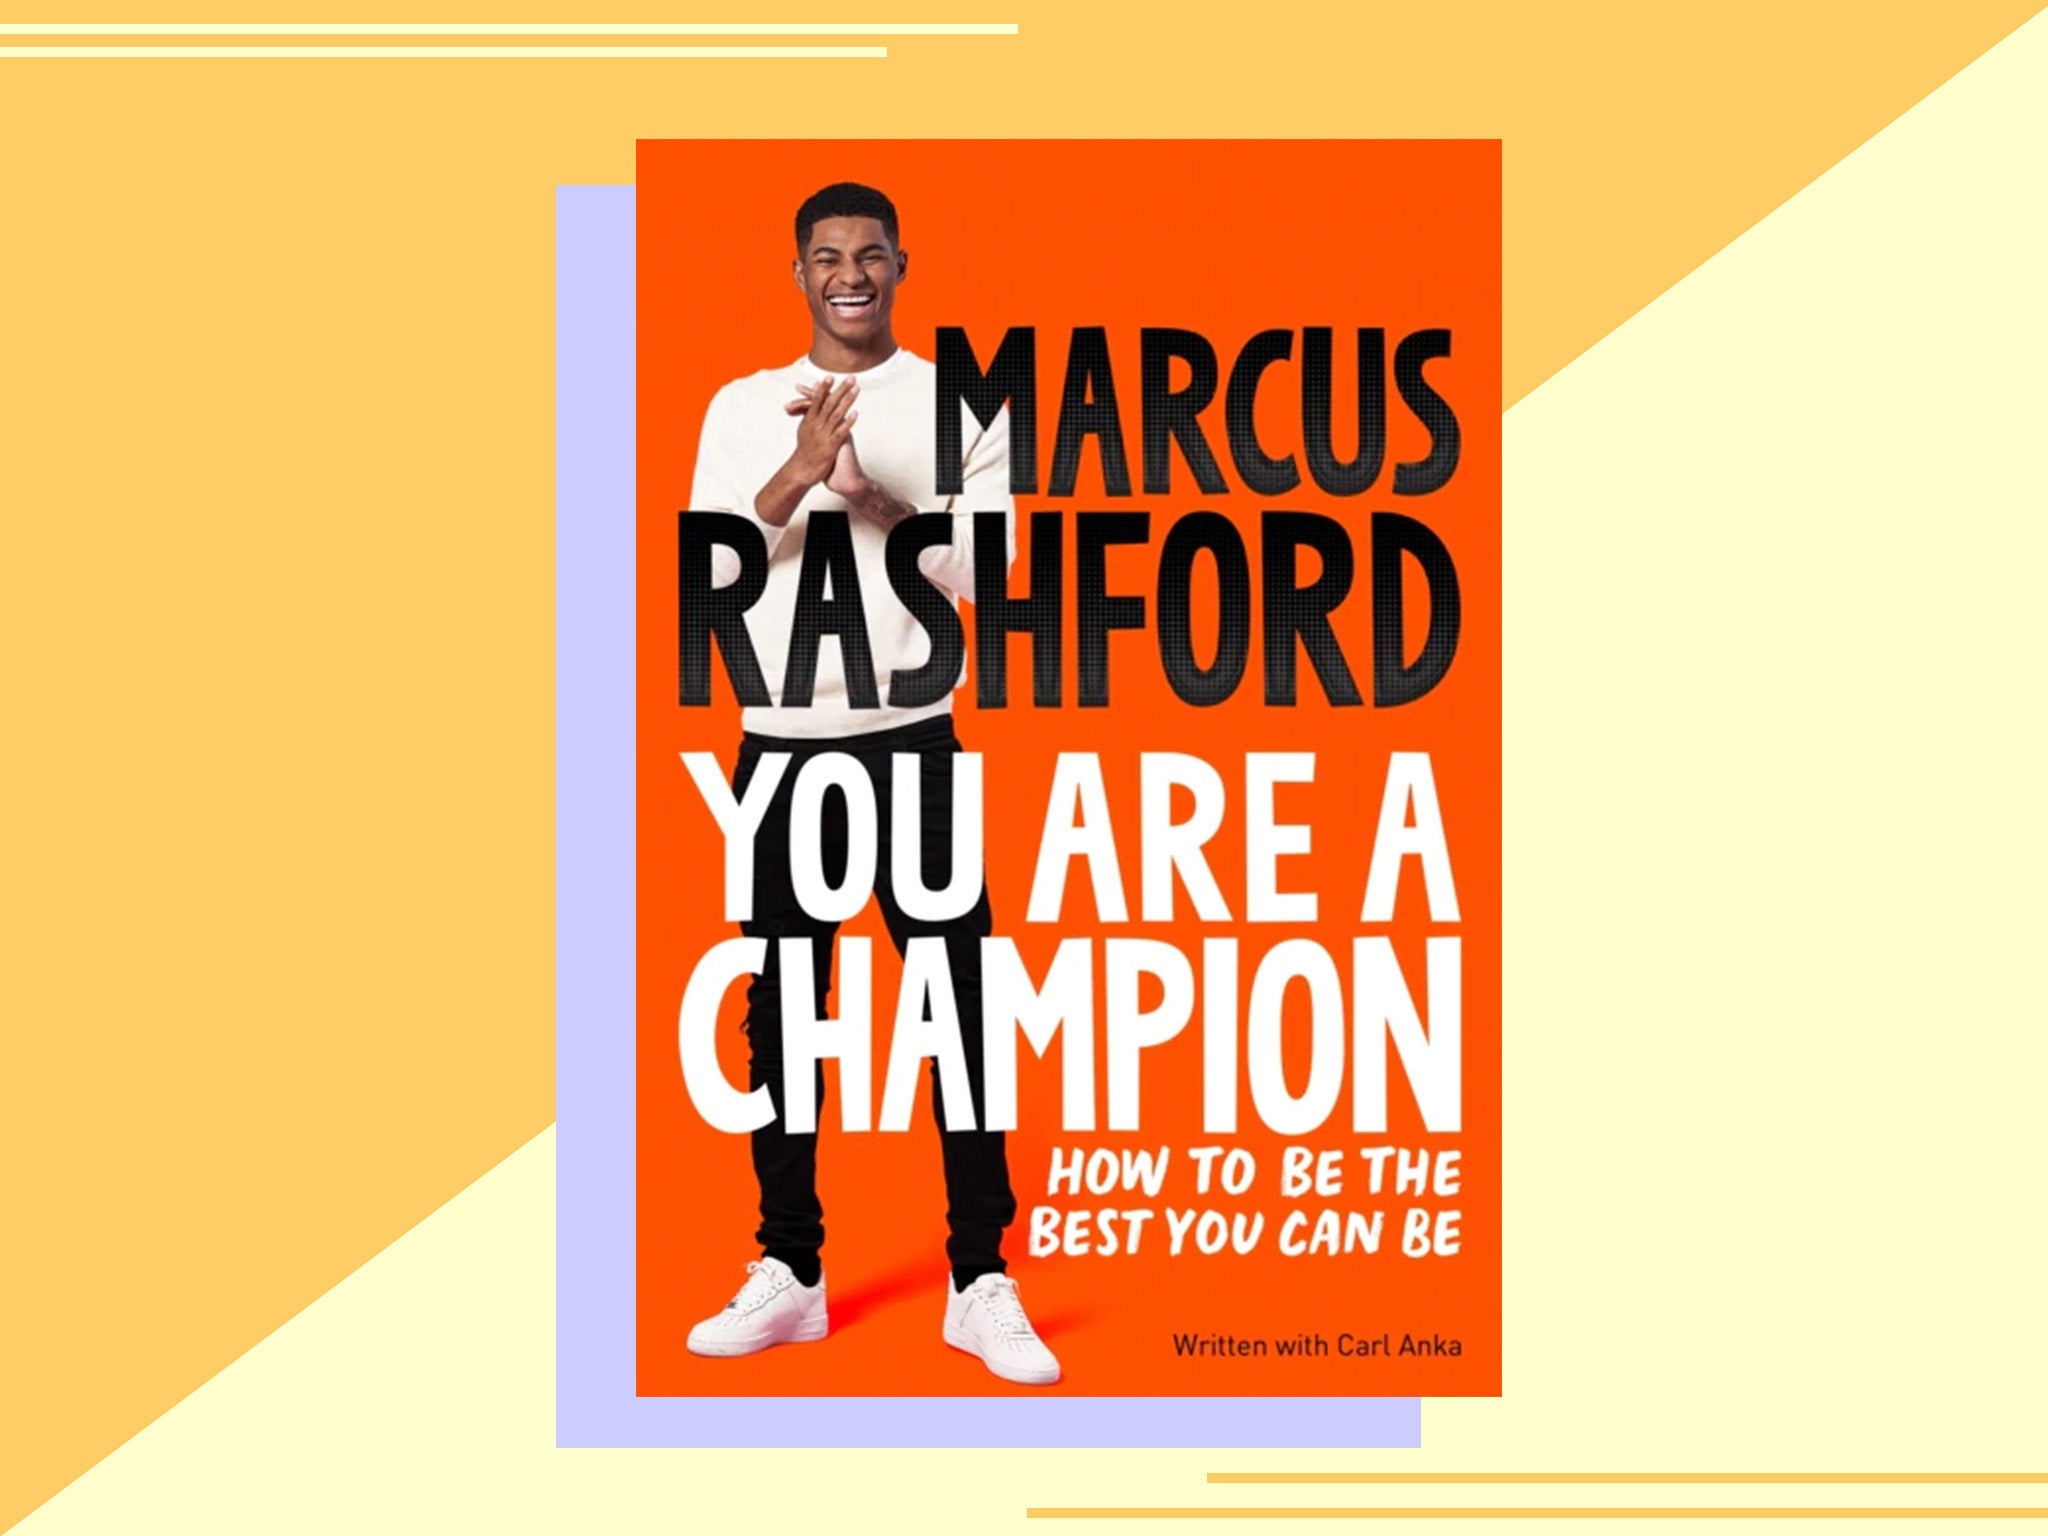 ‘You Are a Champion’ offers advice to your kids looking to achieve their goals